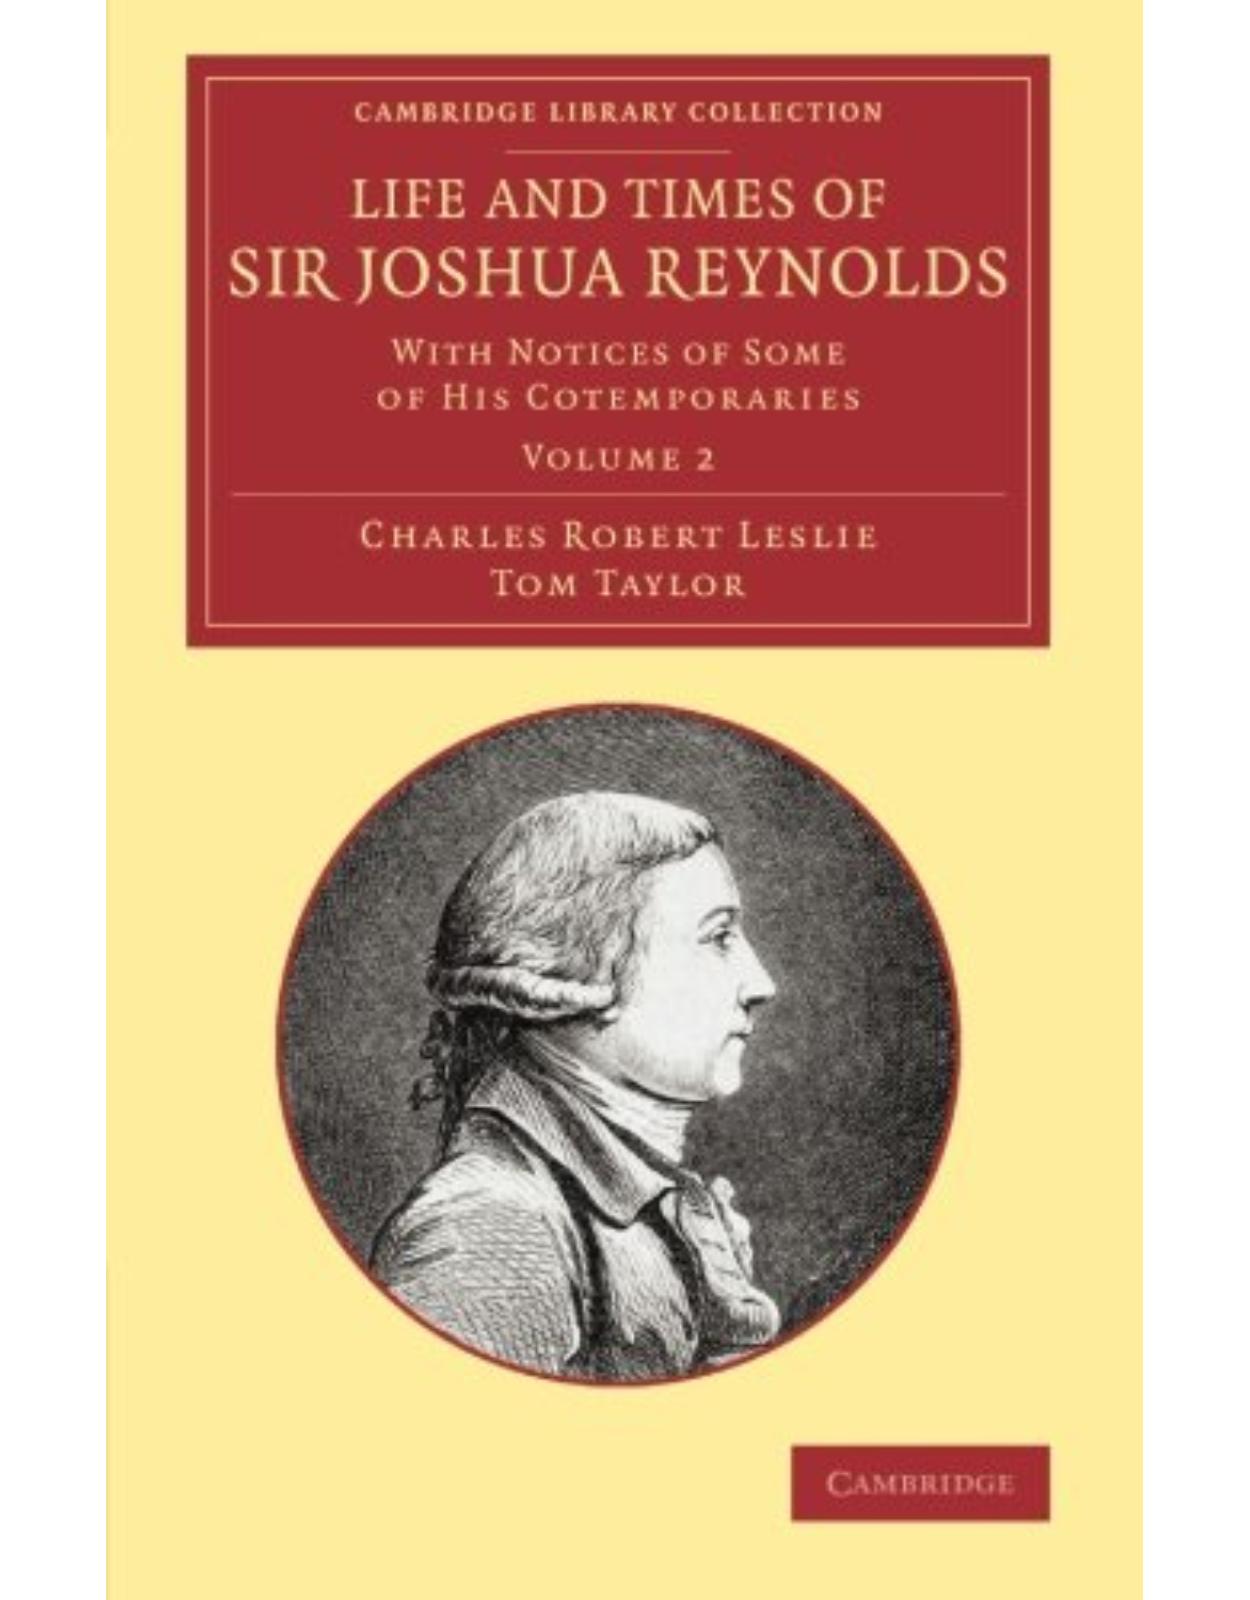 Life and Times of Sir Joshua Reynolds: Volume 2: With Notices of Some of his Cotemporaries (Cambridge Library Collection - Art and Architecture)